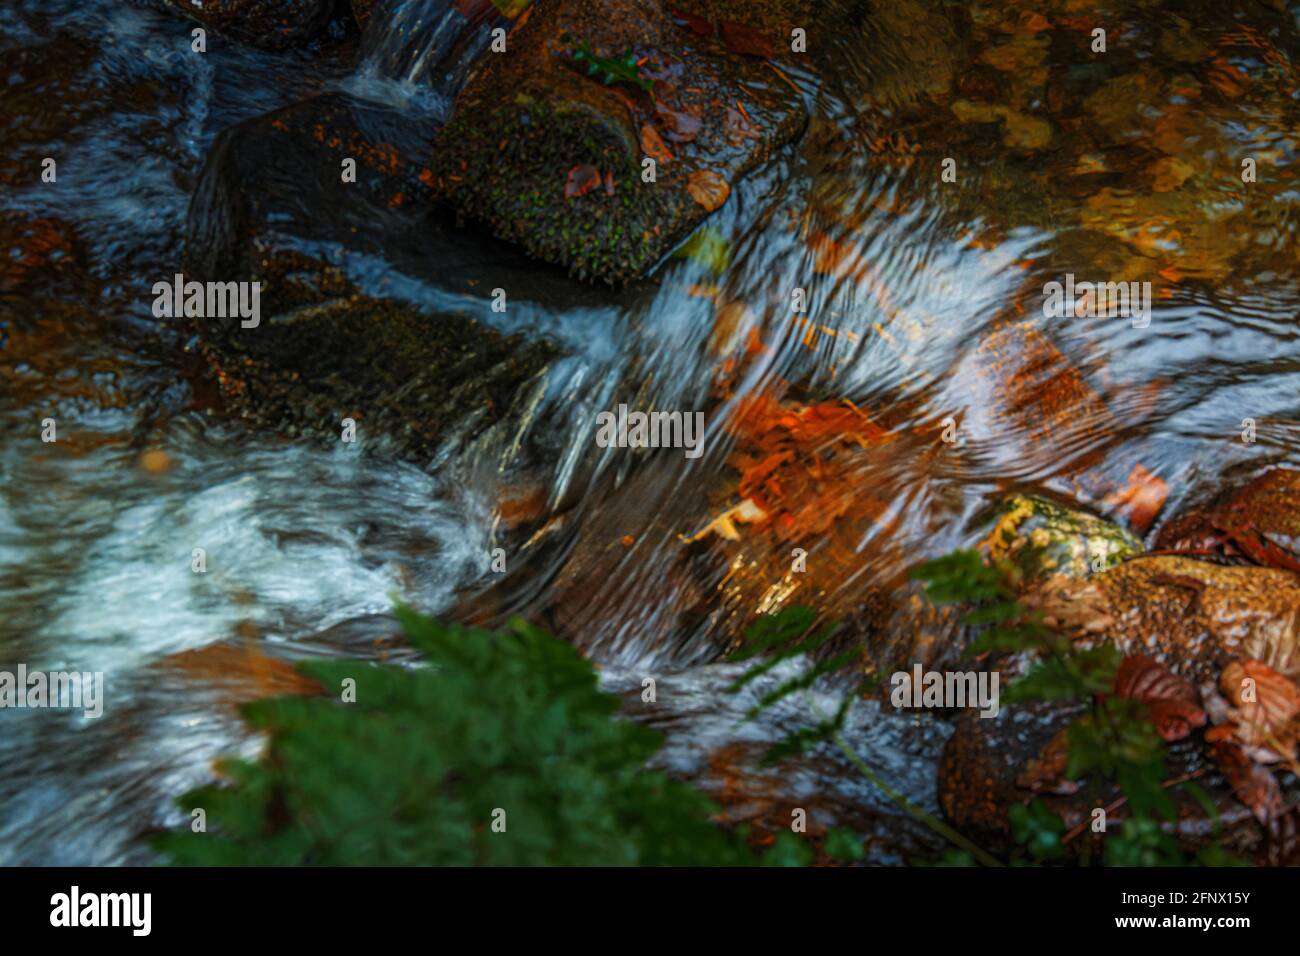 Close up of bubbling rapids with small waterfalls of Clonaugh River with clear mountain water showing brown leaves on a bottom flowing downstream. Stock Photo